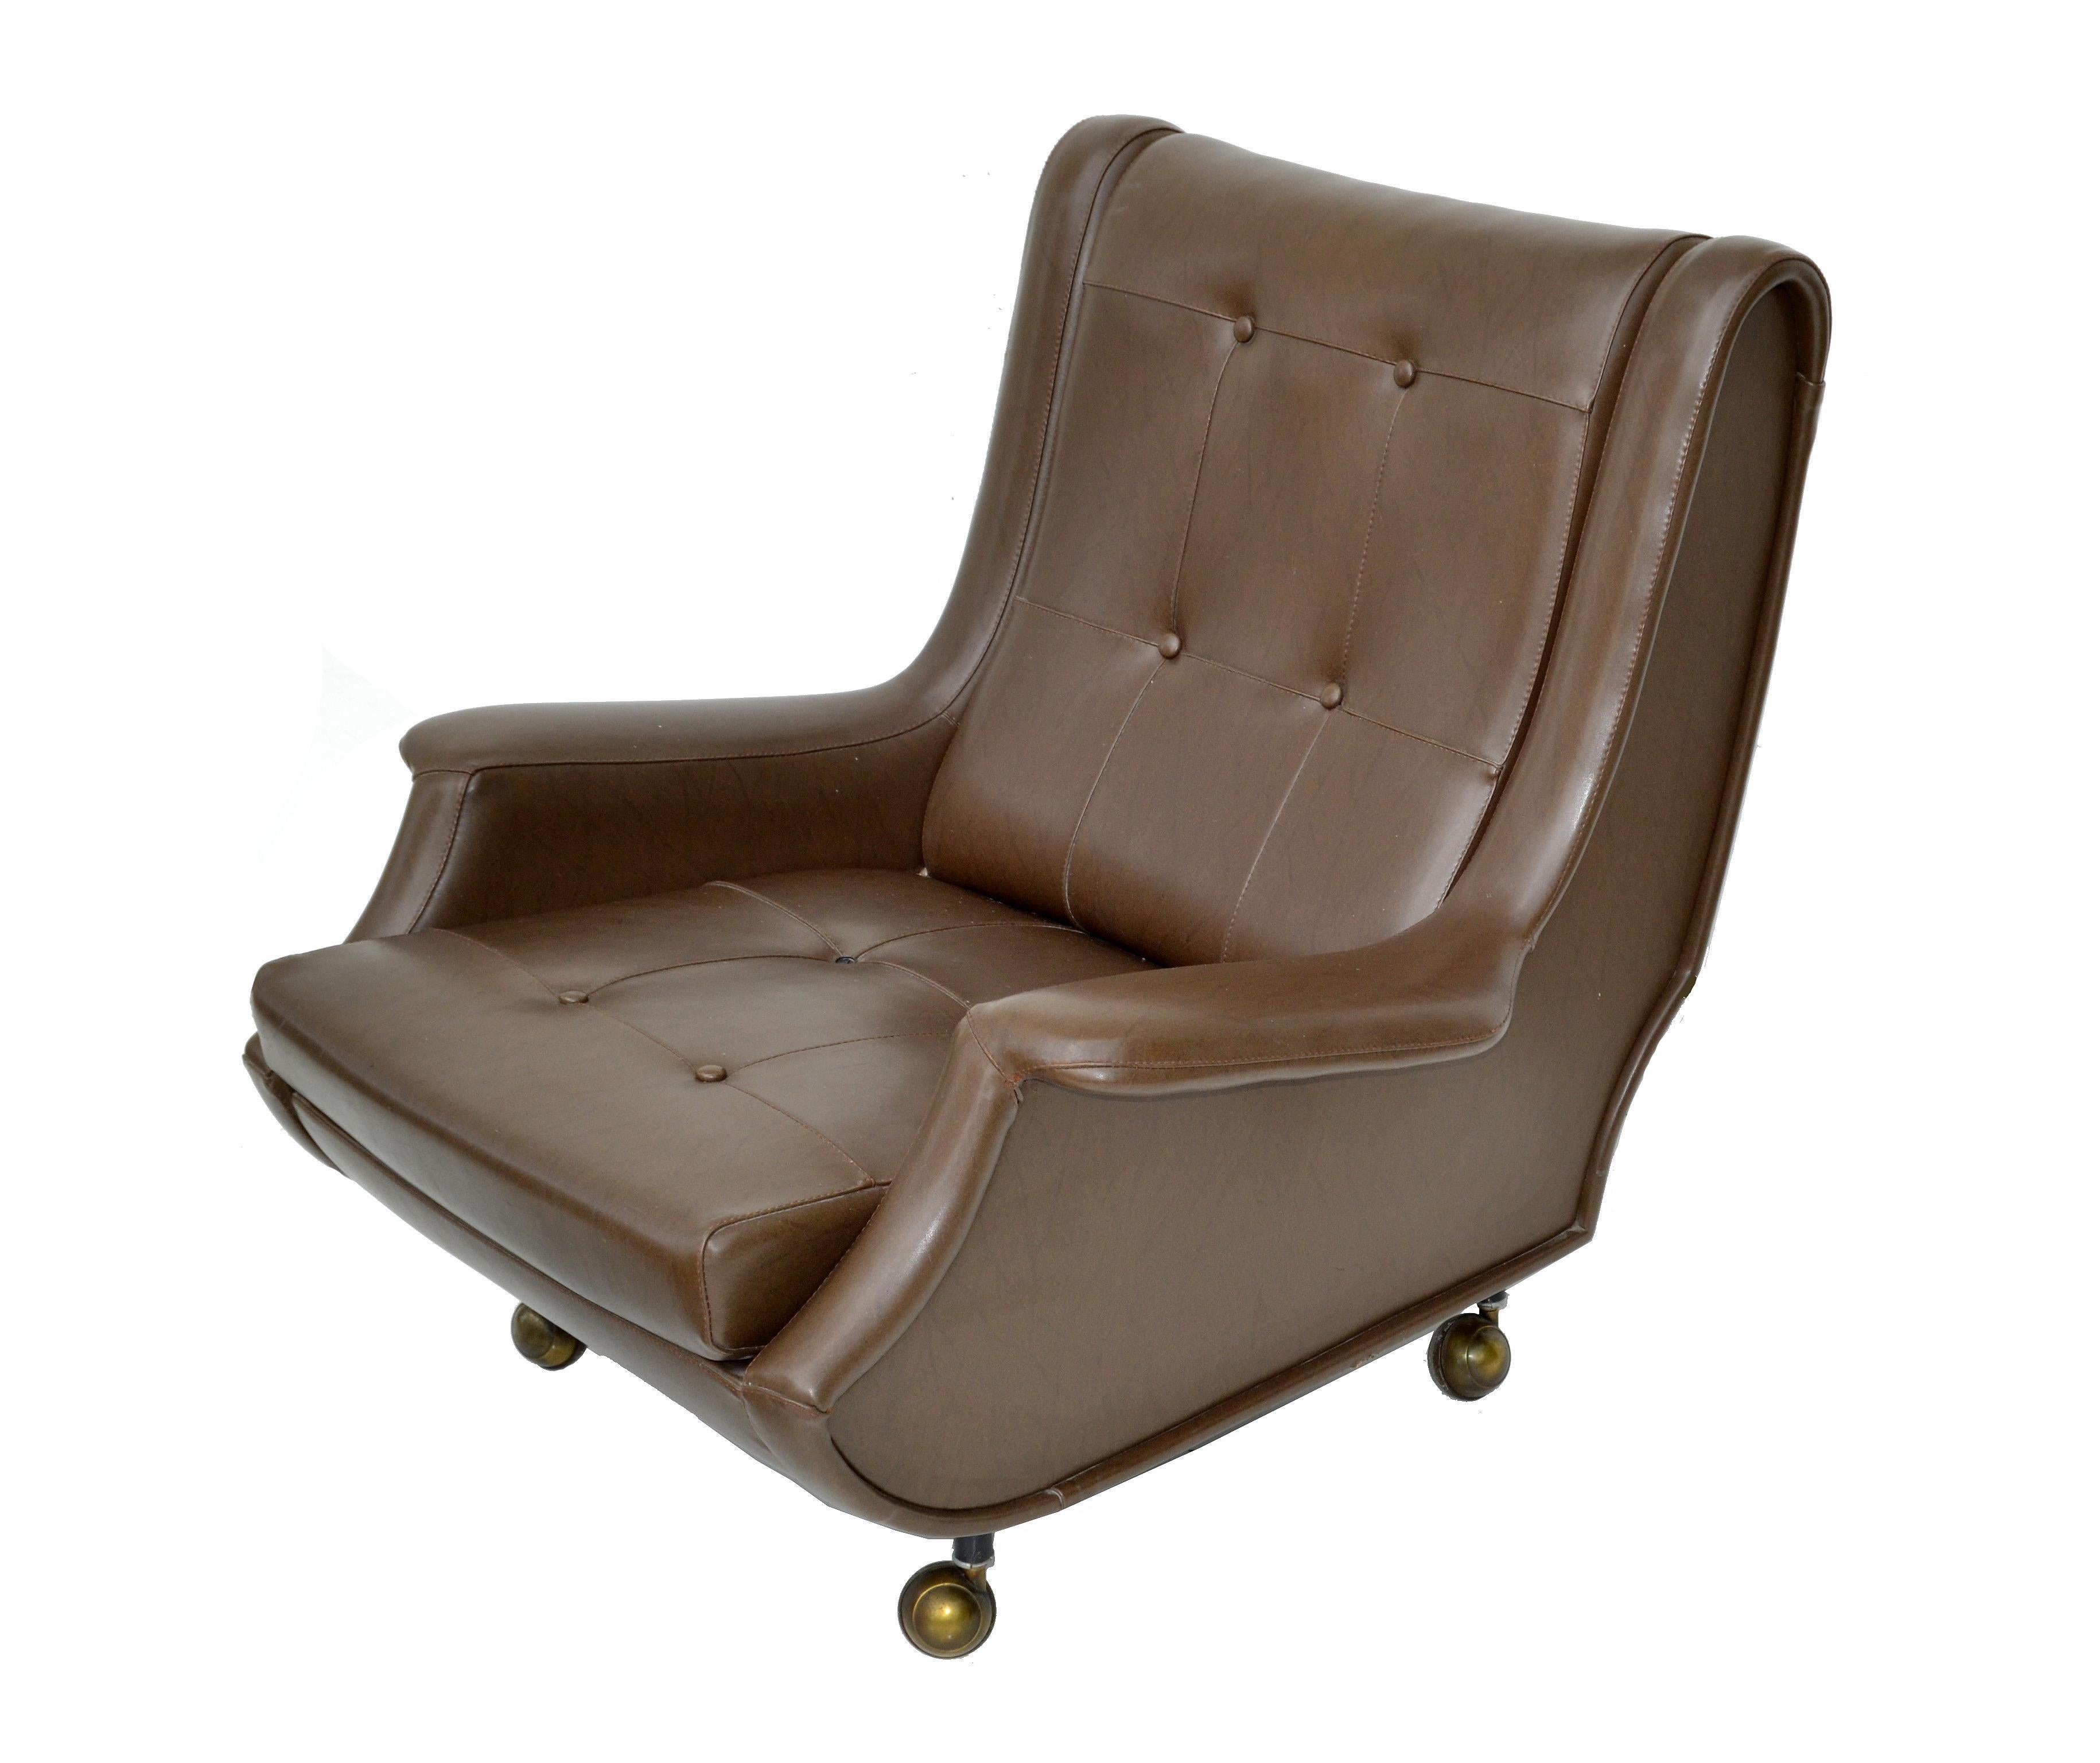 Exceptional chair  designed by Marco Zanuso made by Arflex, Italy. 
Original brown leather, chair  on casters.
Measures: Chair 33.25 H, 33 W, 33 D,15.5 seat height, 21 W seat interior, Arm Height: 18.25 inches. 
Ottoman: 22 inches x 22 inches x 14.5